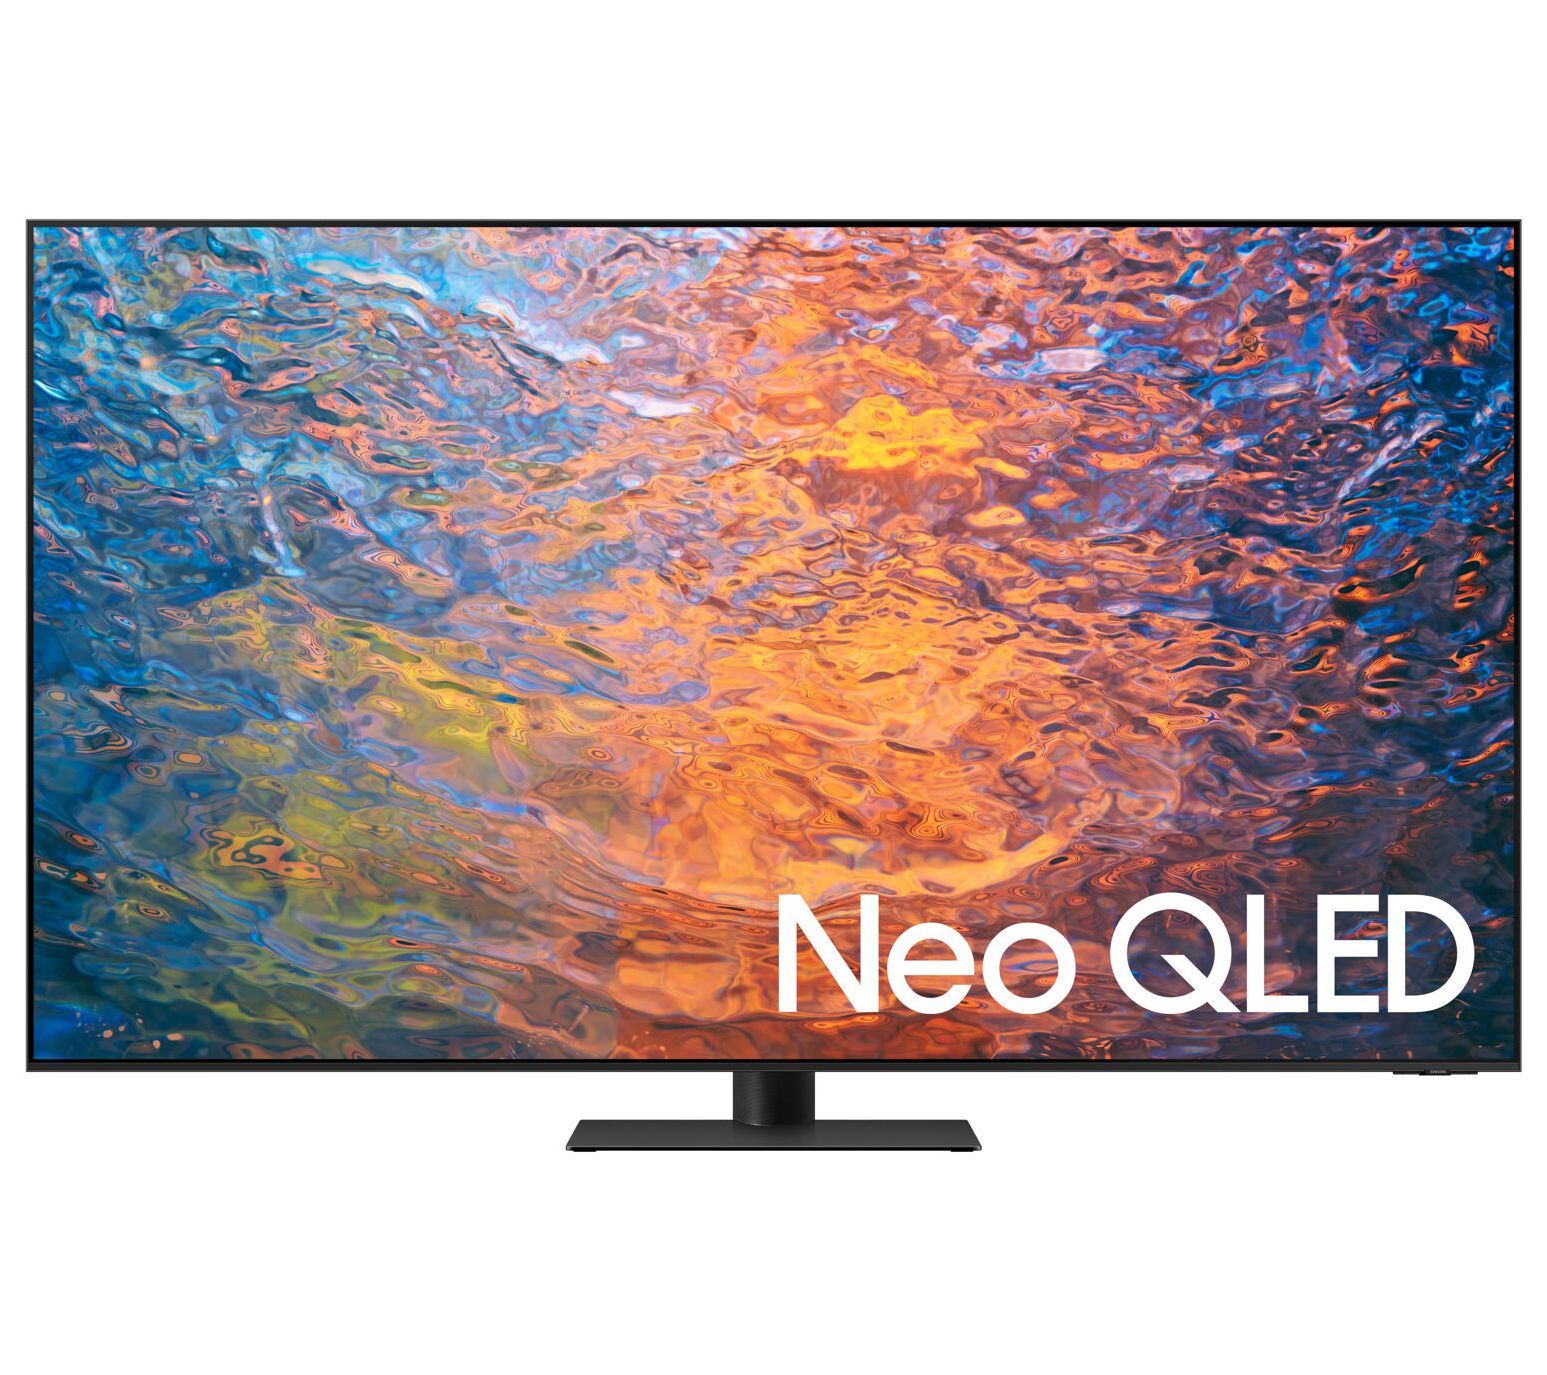 Samsung QN90C Neo QLED TV review: the go-to QLED TV